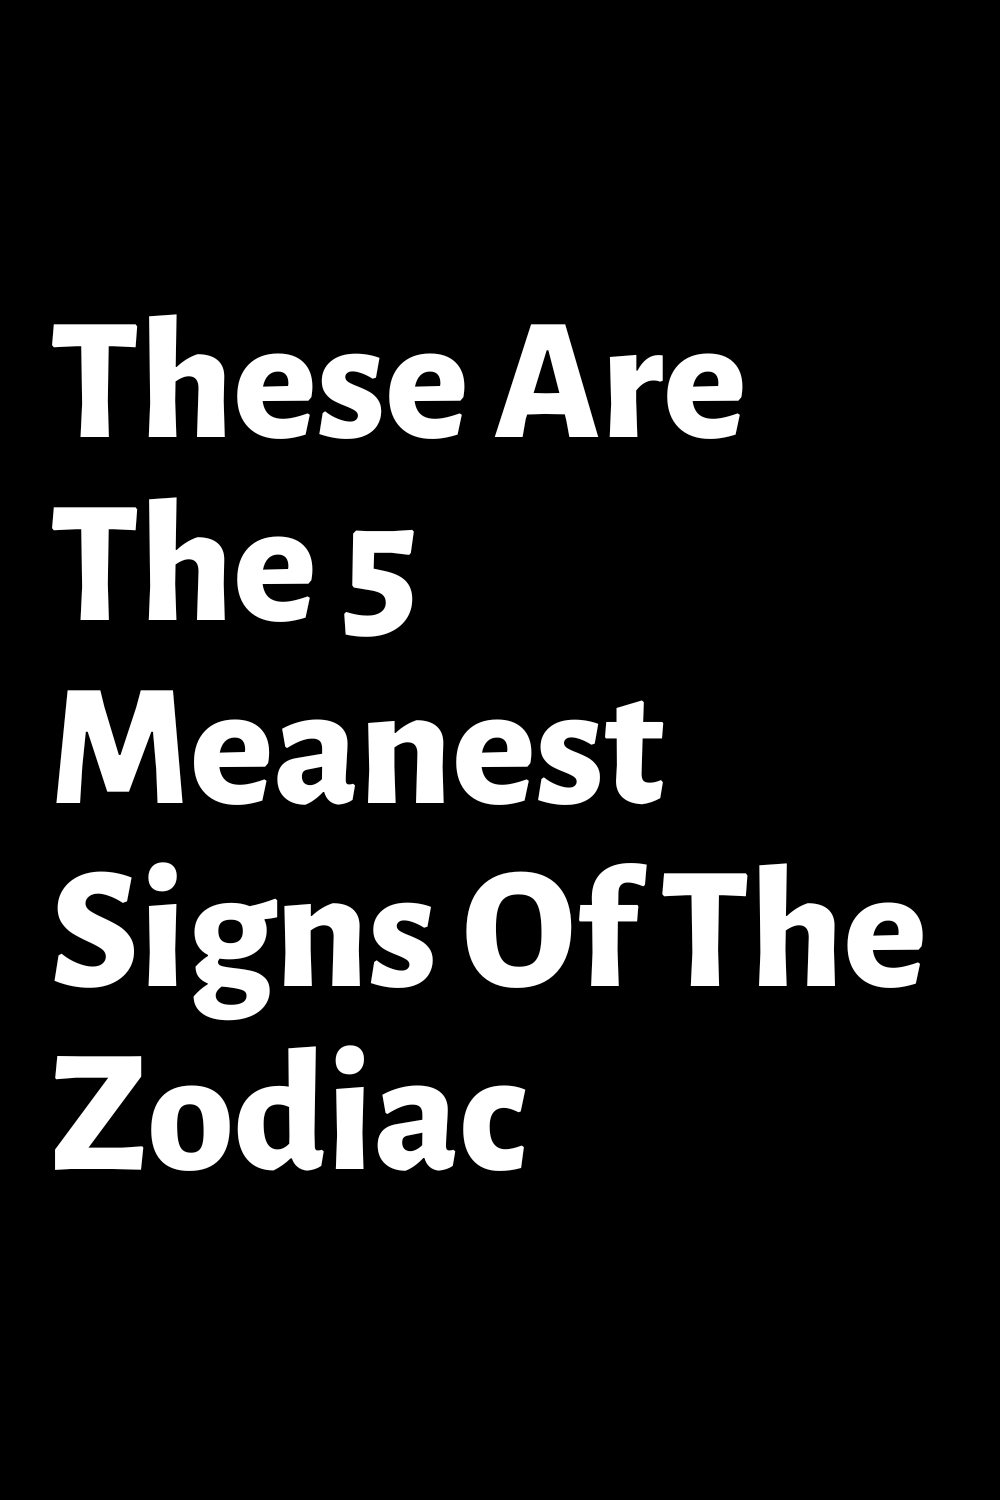 These Are The 5 Meanest Signs Of The Zodiac – ShineFeeds